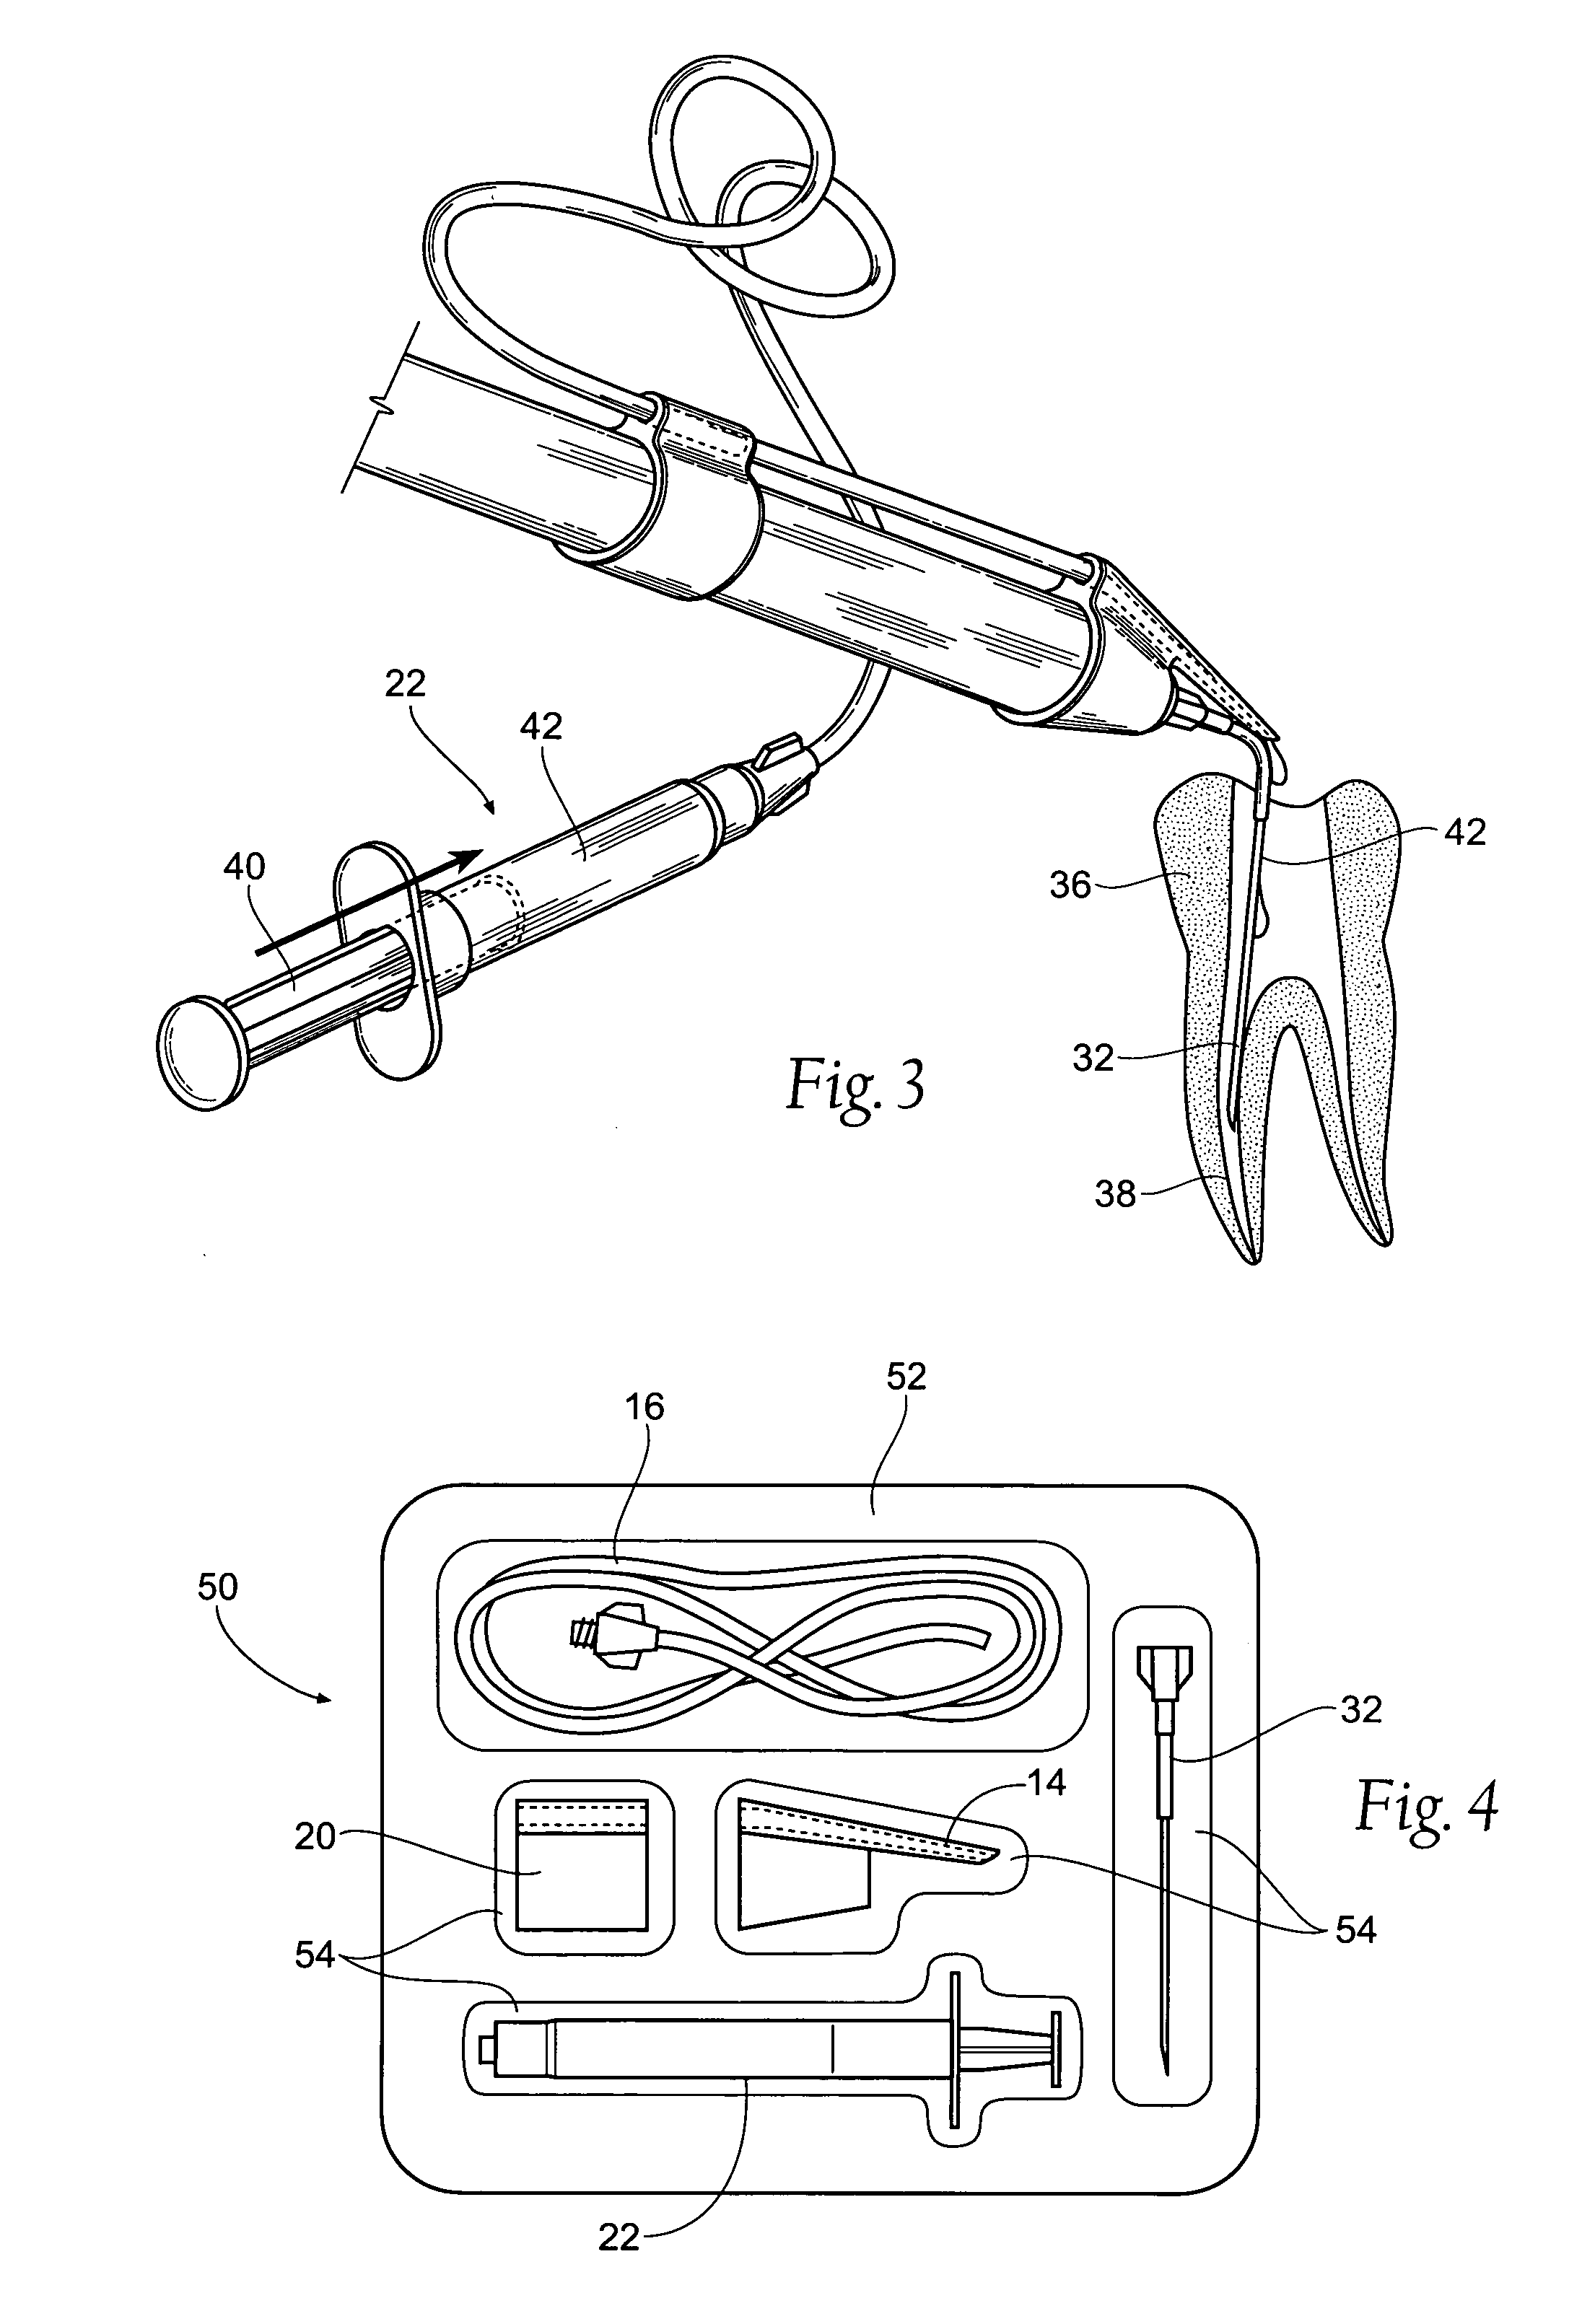 Fluid bypass device for handheld dental devices